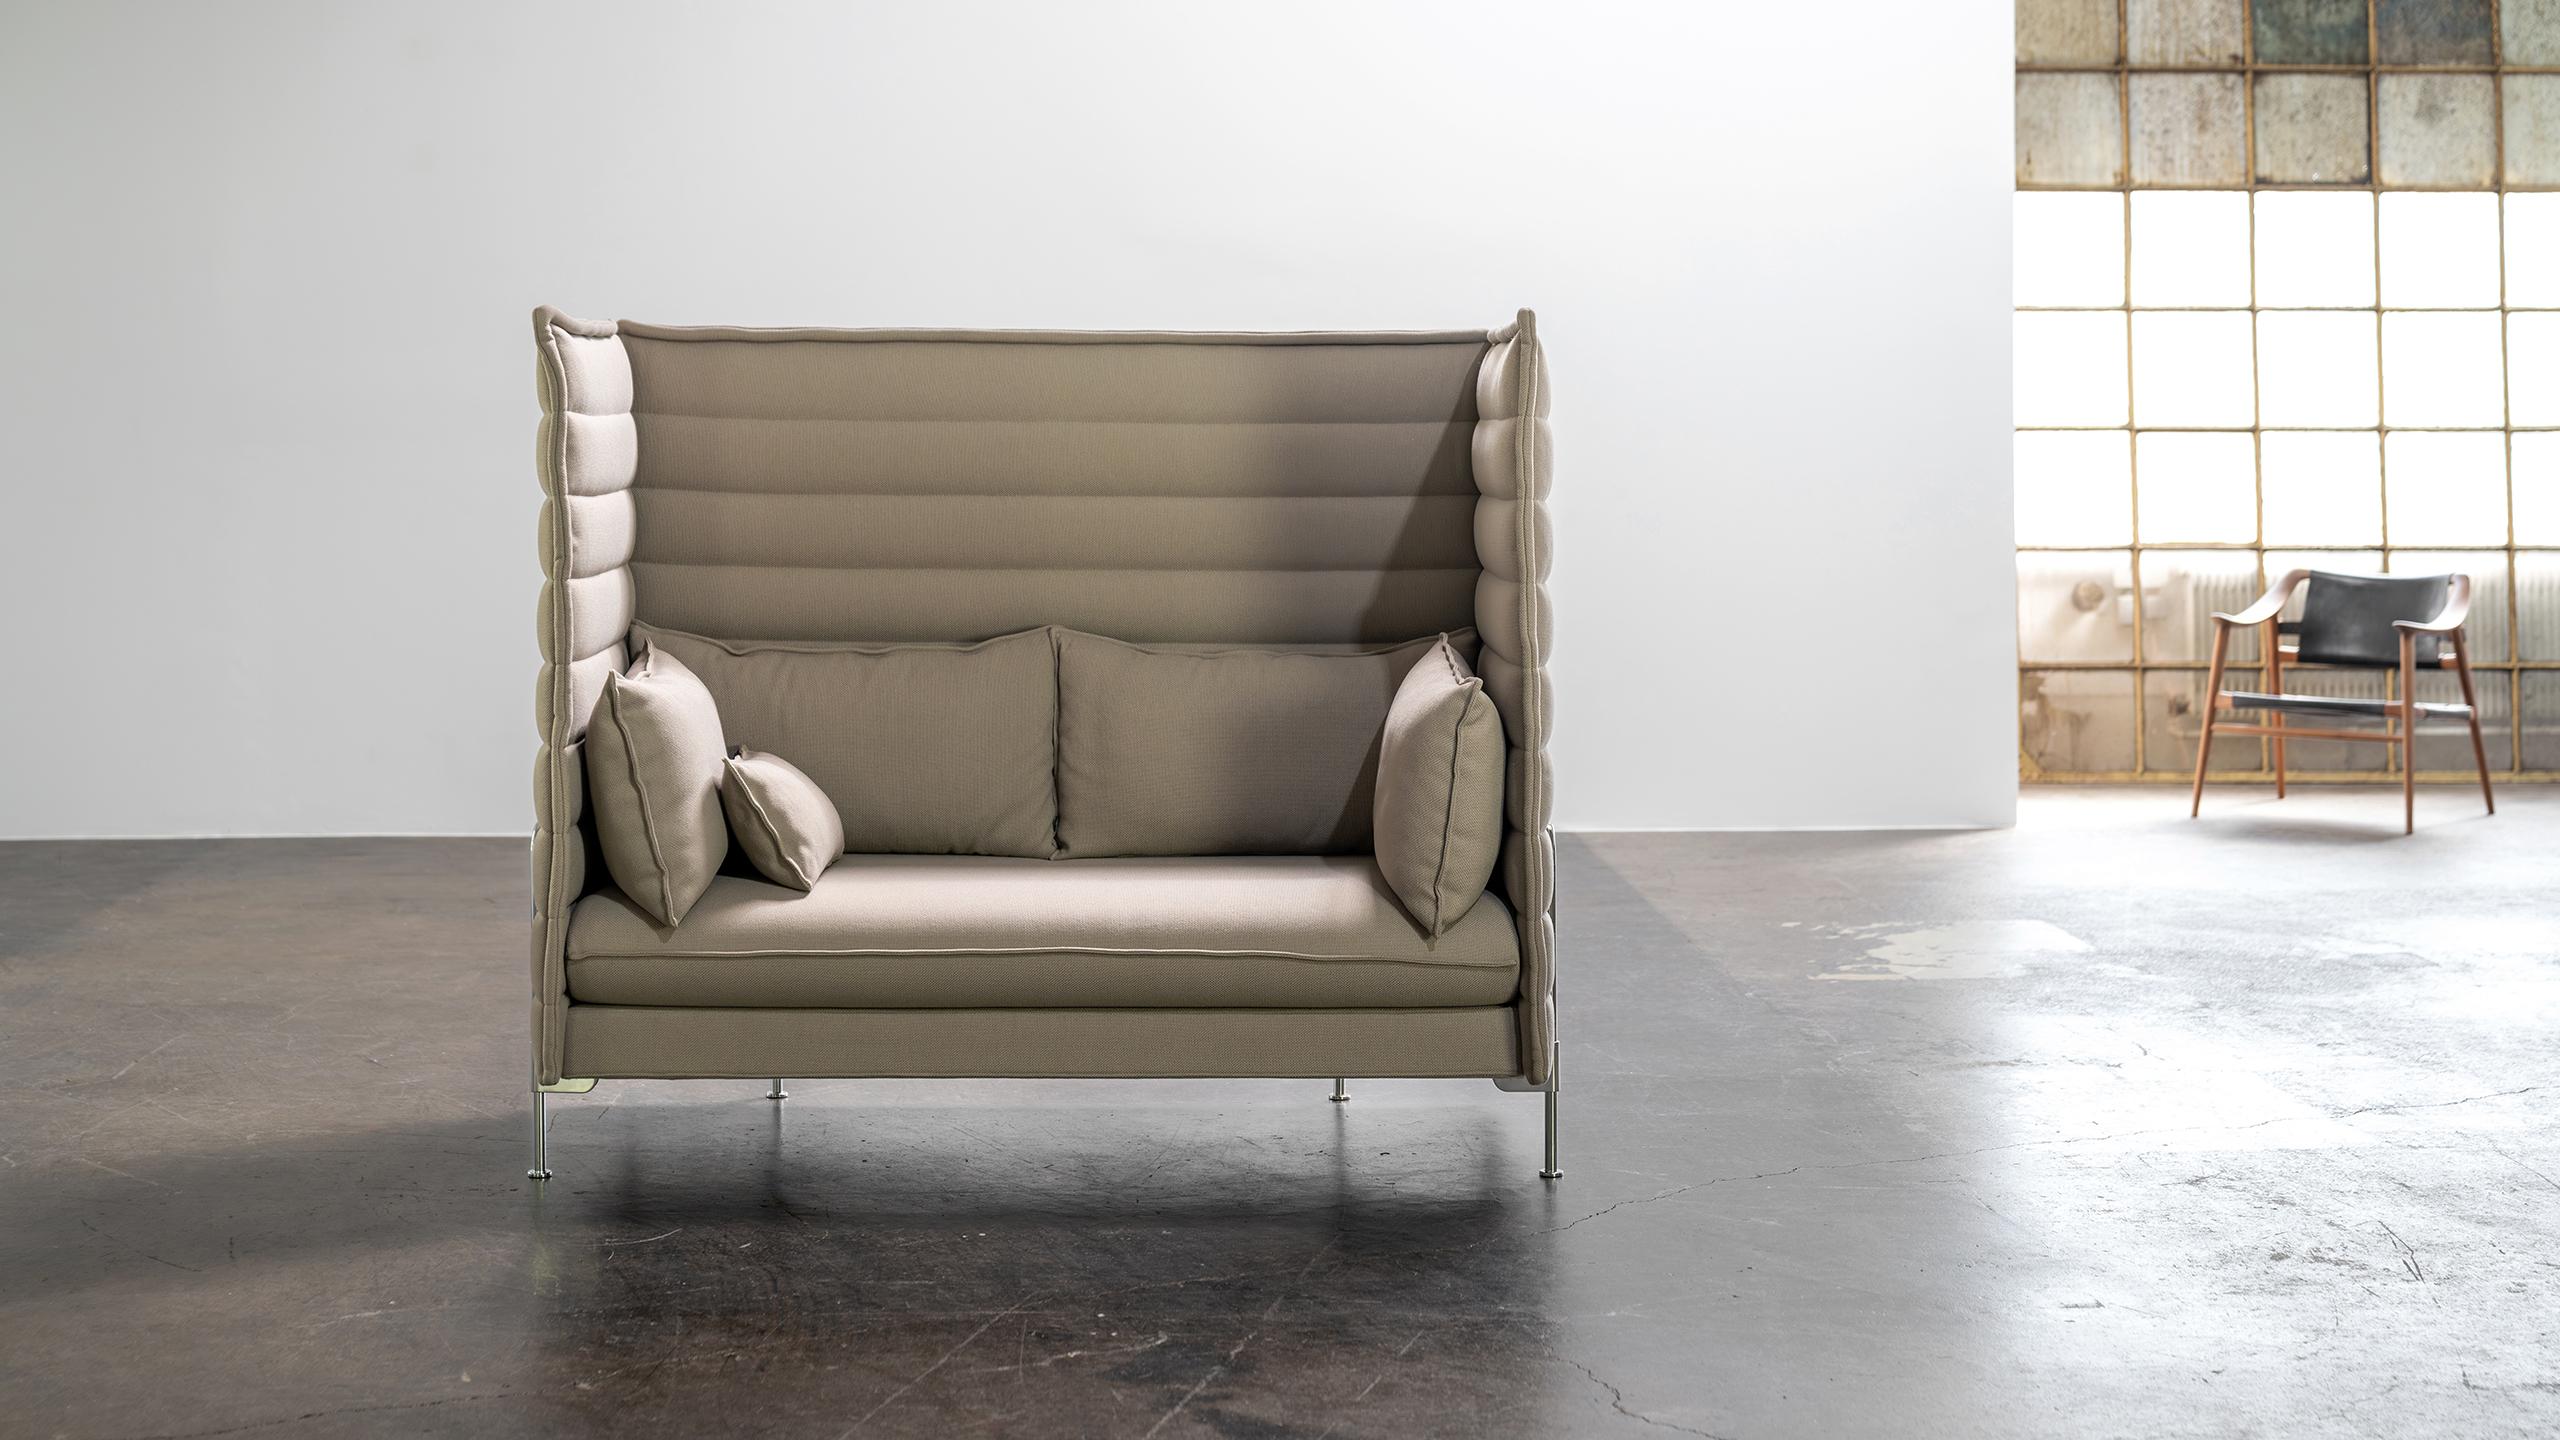 Ronan & Erwan Bouroullec - Alcove Highback Lounge 2 seater Sofa, 2011 by Vitra
(the offer is for 1 of 4 identical sofas avaialble..)

The 'room in a room' is a concept that Vitra has intensively pursued over many years in collaboration with the